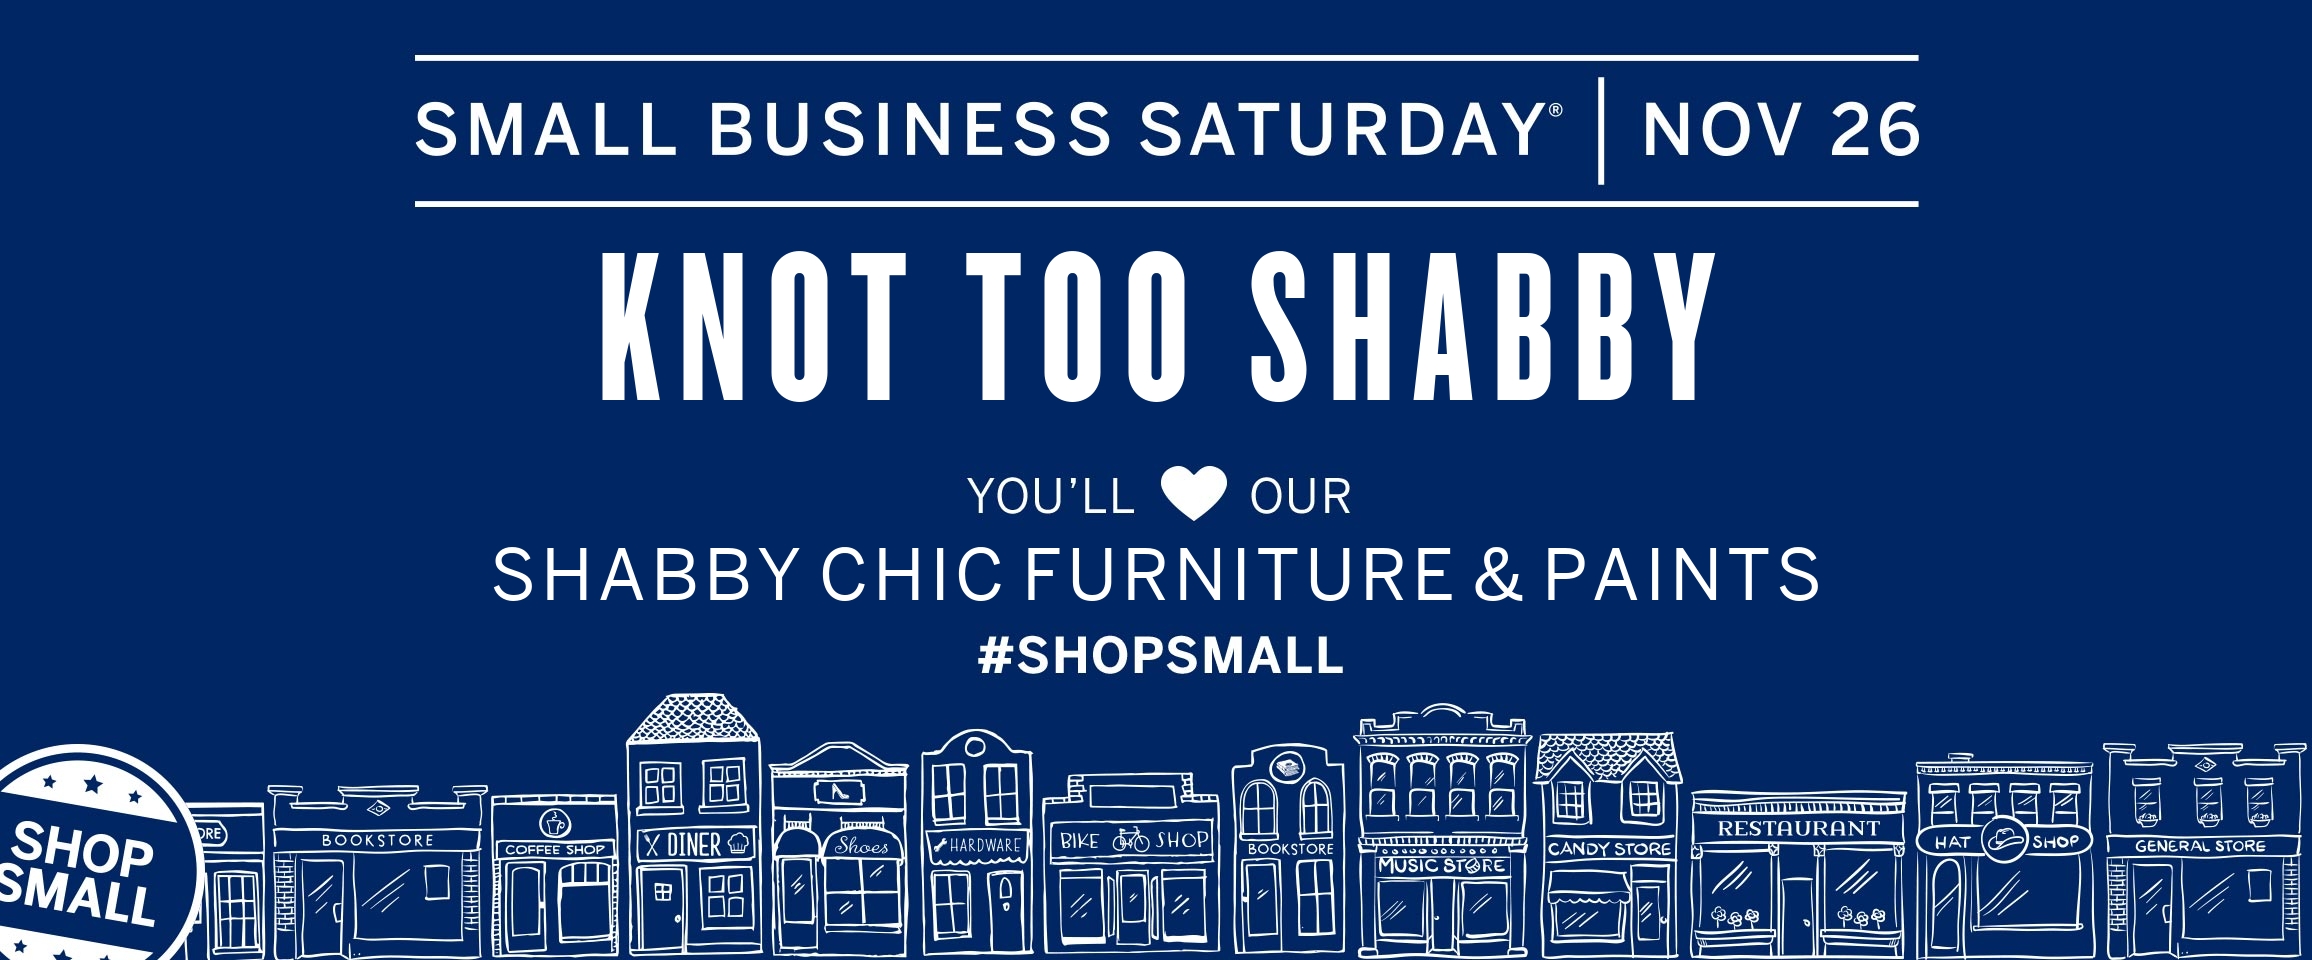 knot too shabby’s #ShopSmall Sweepstakes